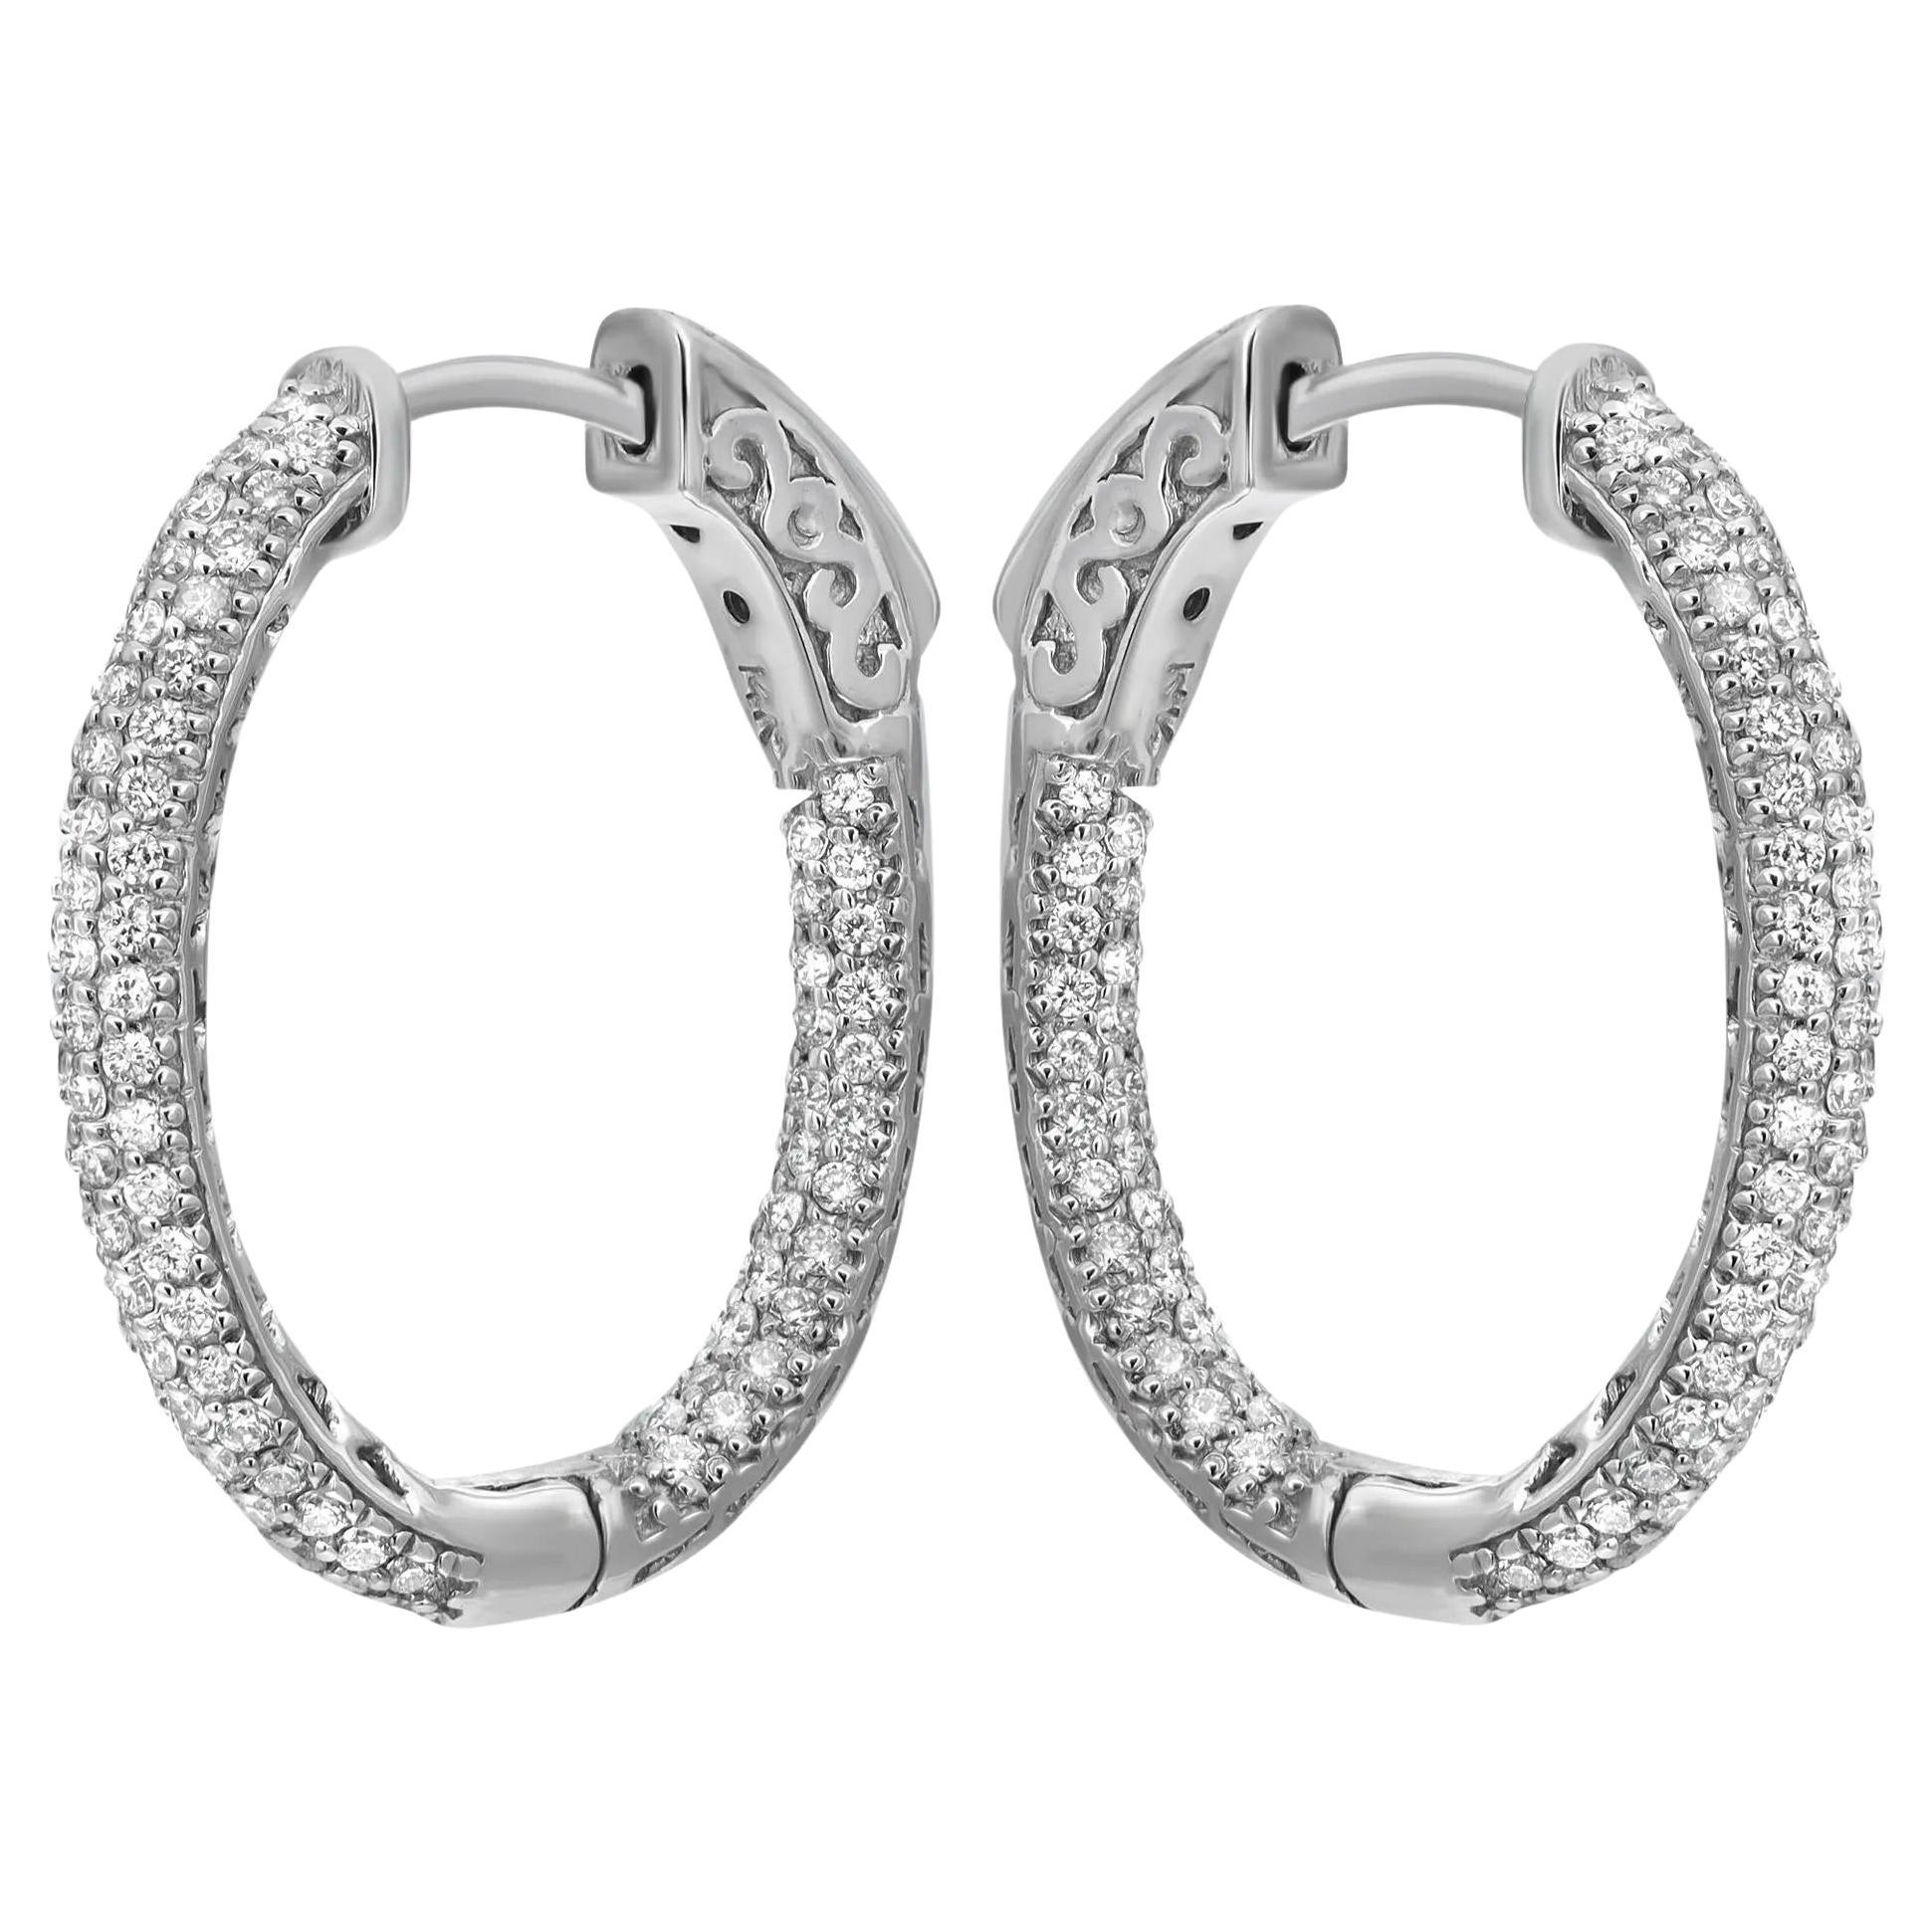 Pave Set Round Cut Diamond Oval Hoop Earrings 14K White Gold 1.00Cttw 1 Inch